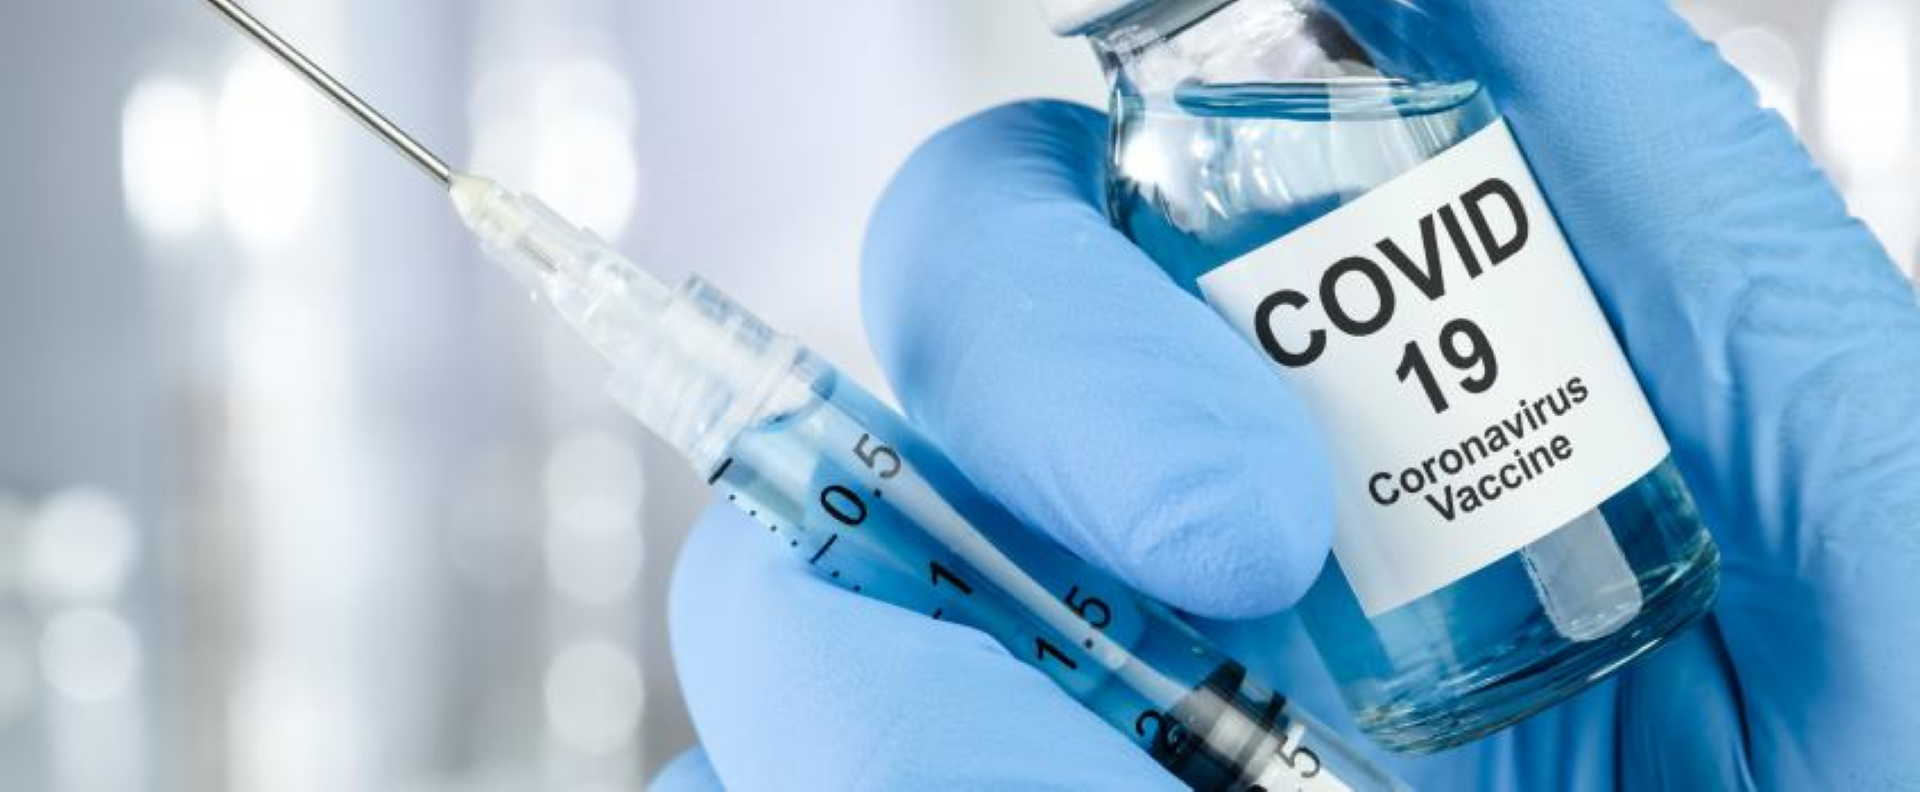 Icn Calls On The Public To Embrace Properly Tested And Regulated Covid 19 Vaccines As Soon As They Are Available Icn International Council Of Nurses